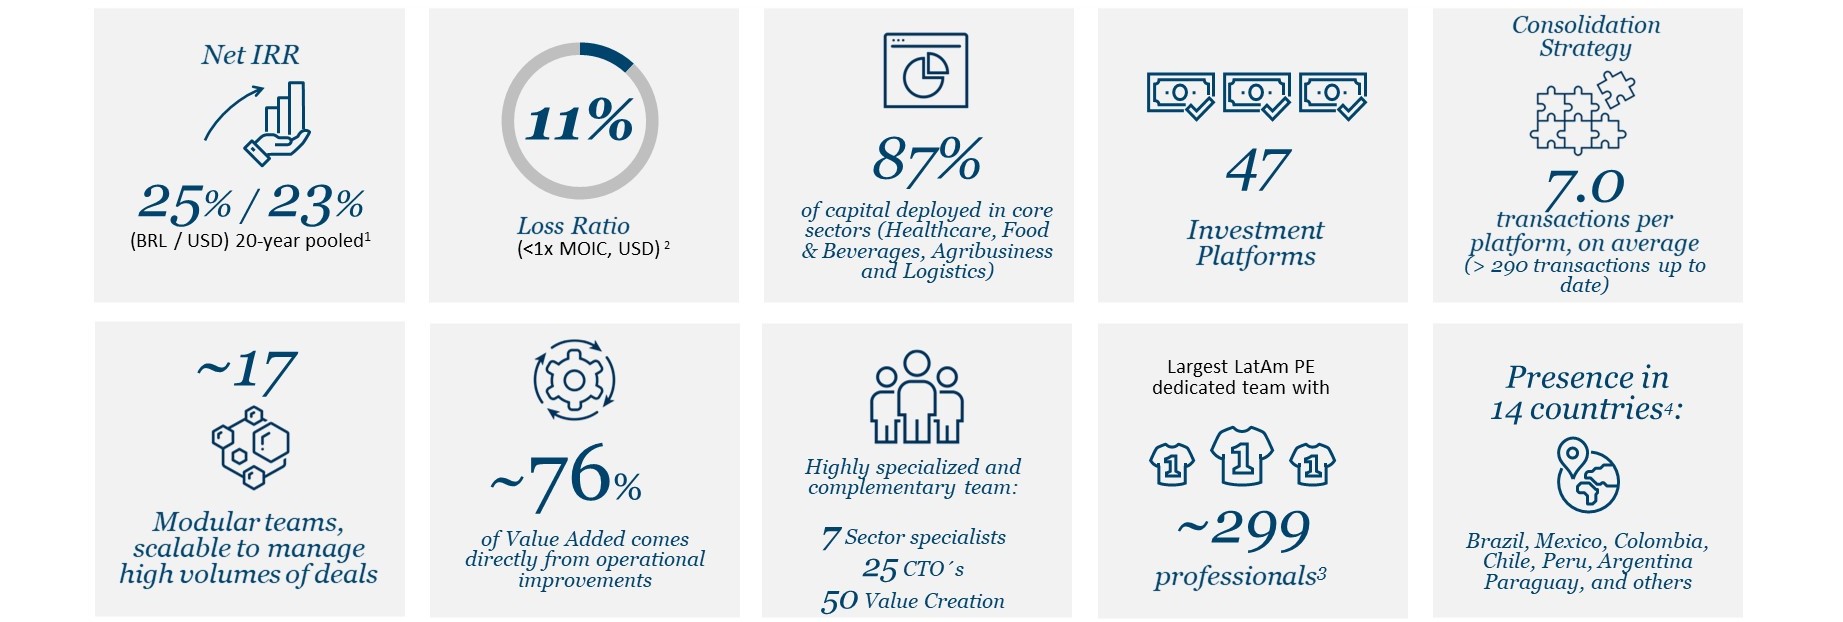 03. Private Equity Key Highlights.jpg